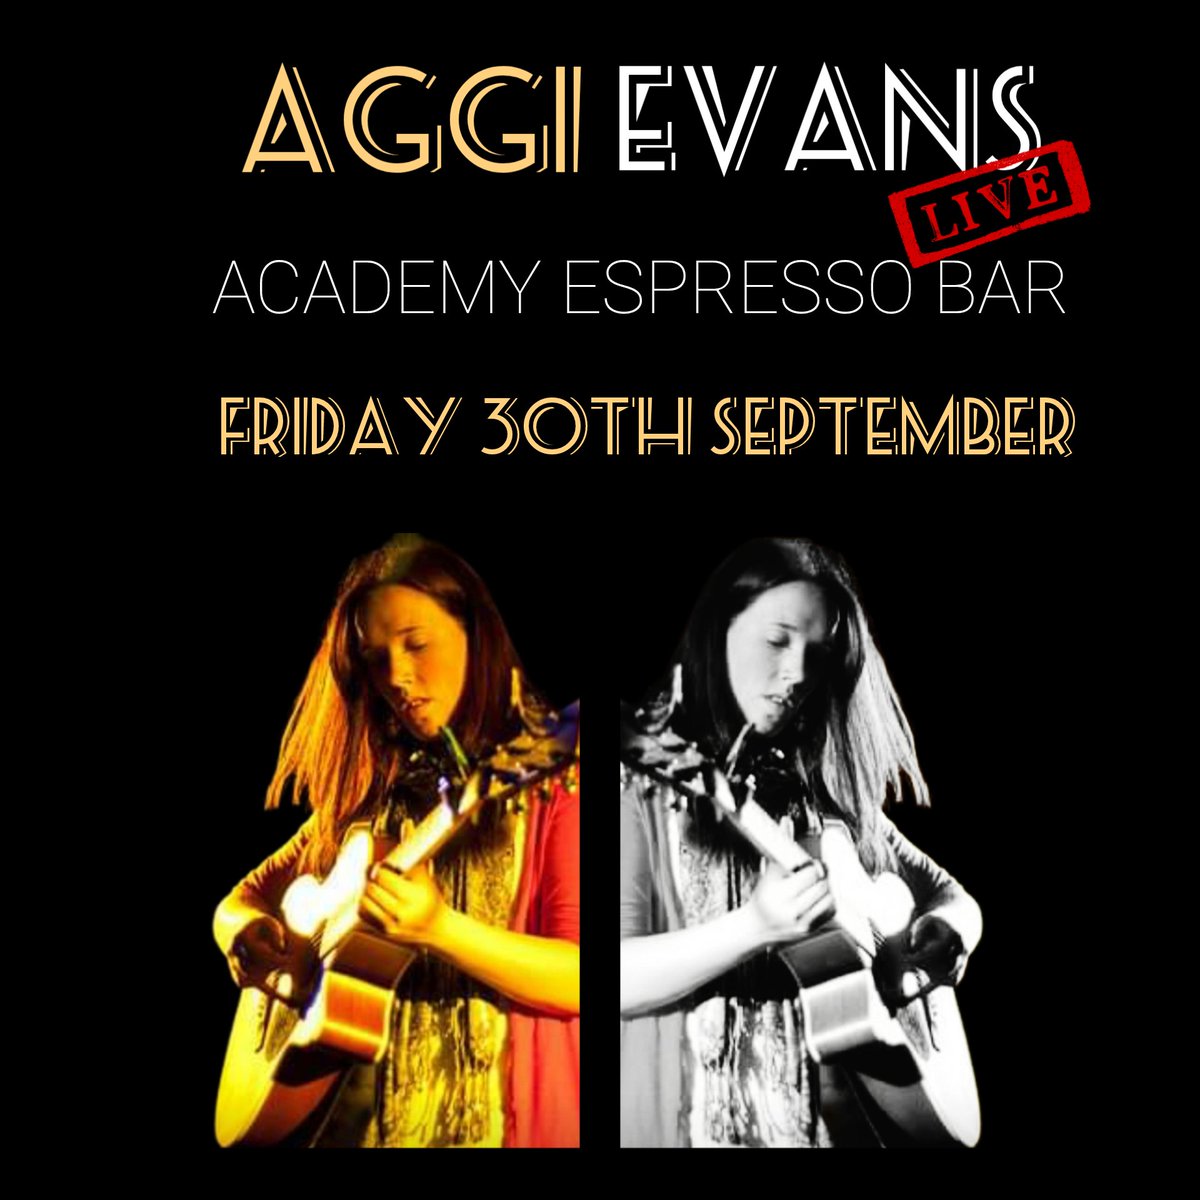 Can't wait to round off my birthday month with a gig at @academyespresso on Friday 30th September 🎵

#LiveMusic #SingerSongwriter #Singer #Songwriter #Guitarist #Musician #Gigs #Gig #SouthWalesMusic #SouthWalesLiveMusic